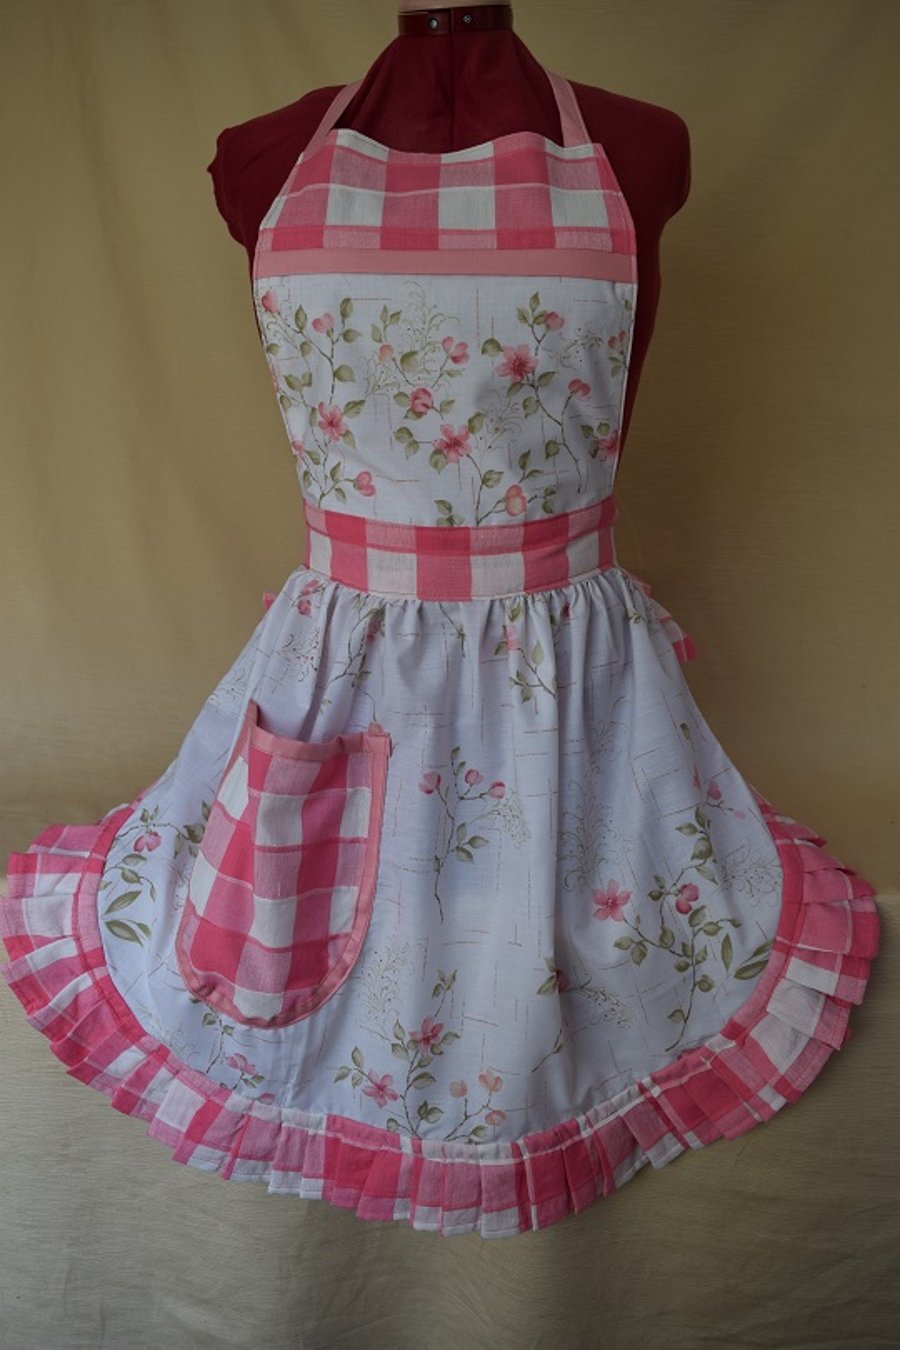 Vintage 50s Style Full Apron Pinny - Pink & Cream (Flowers)